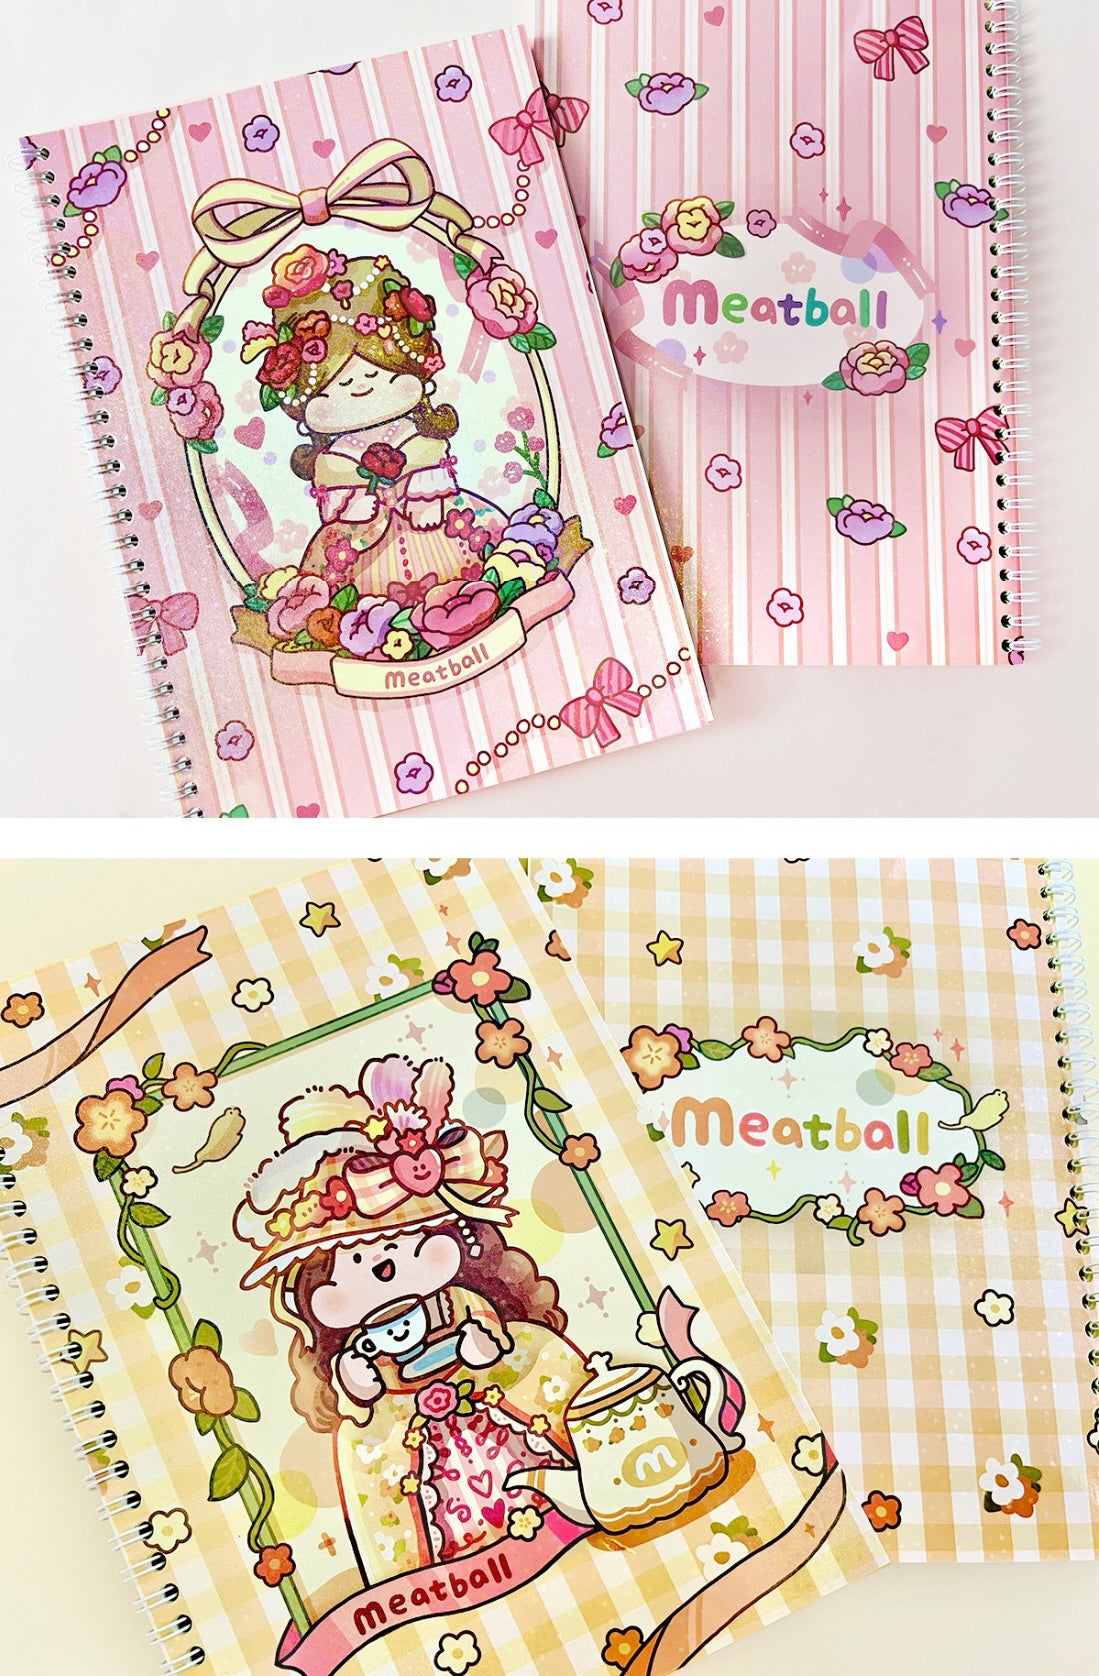 Meatball 「Travel」series 2 France washitape and sticker holder book